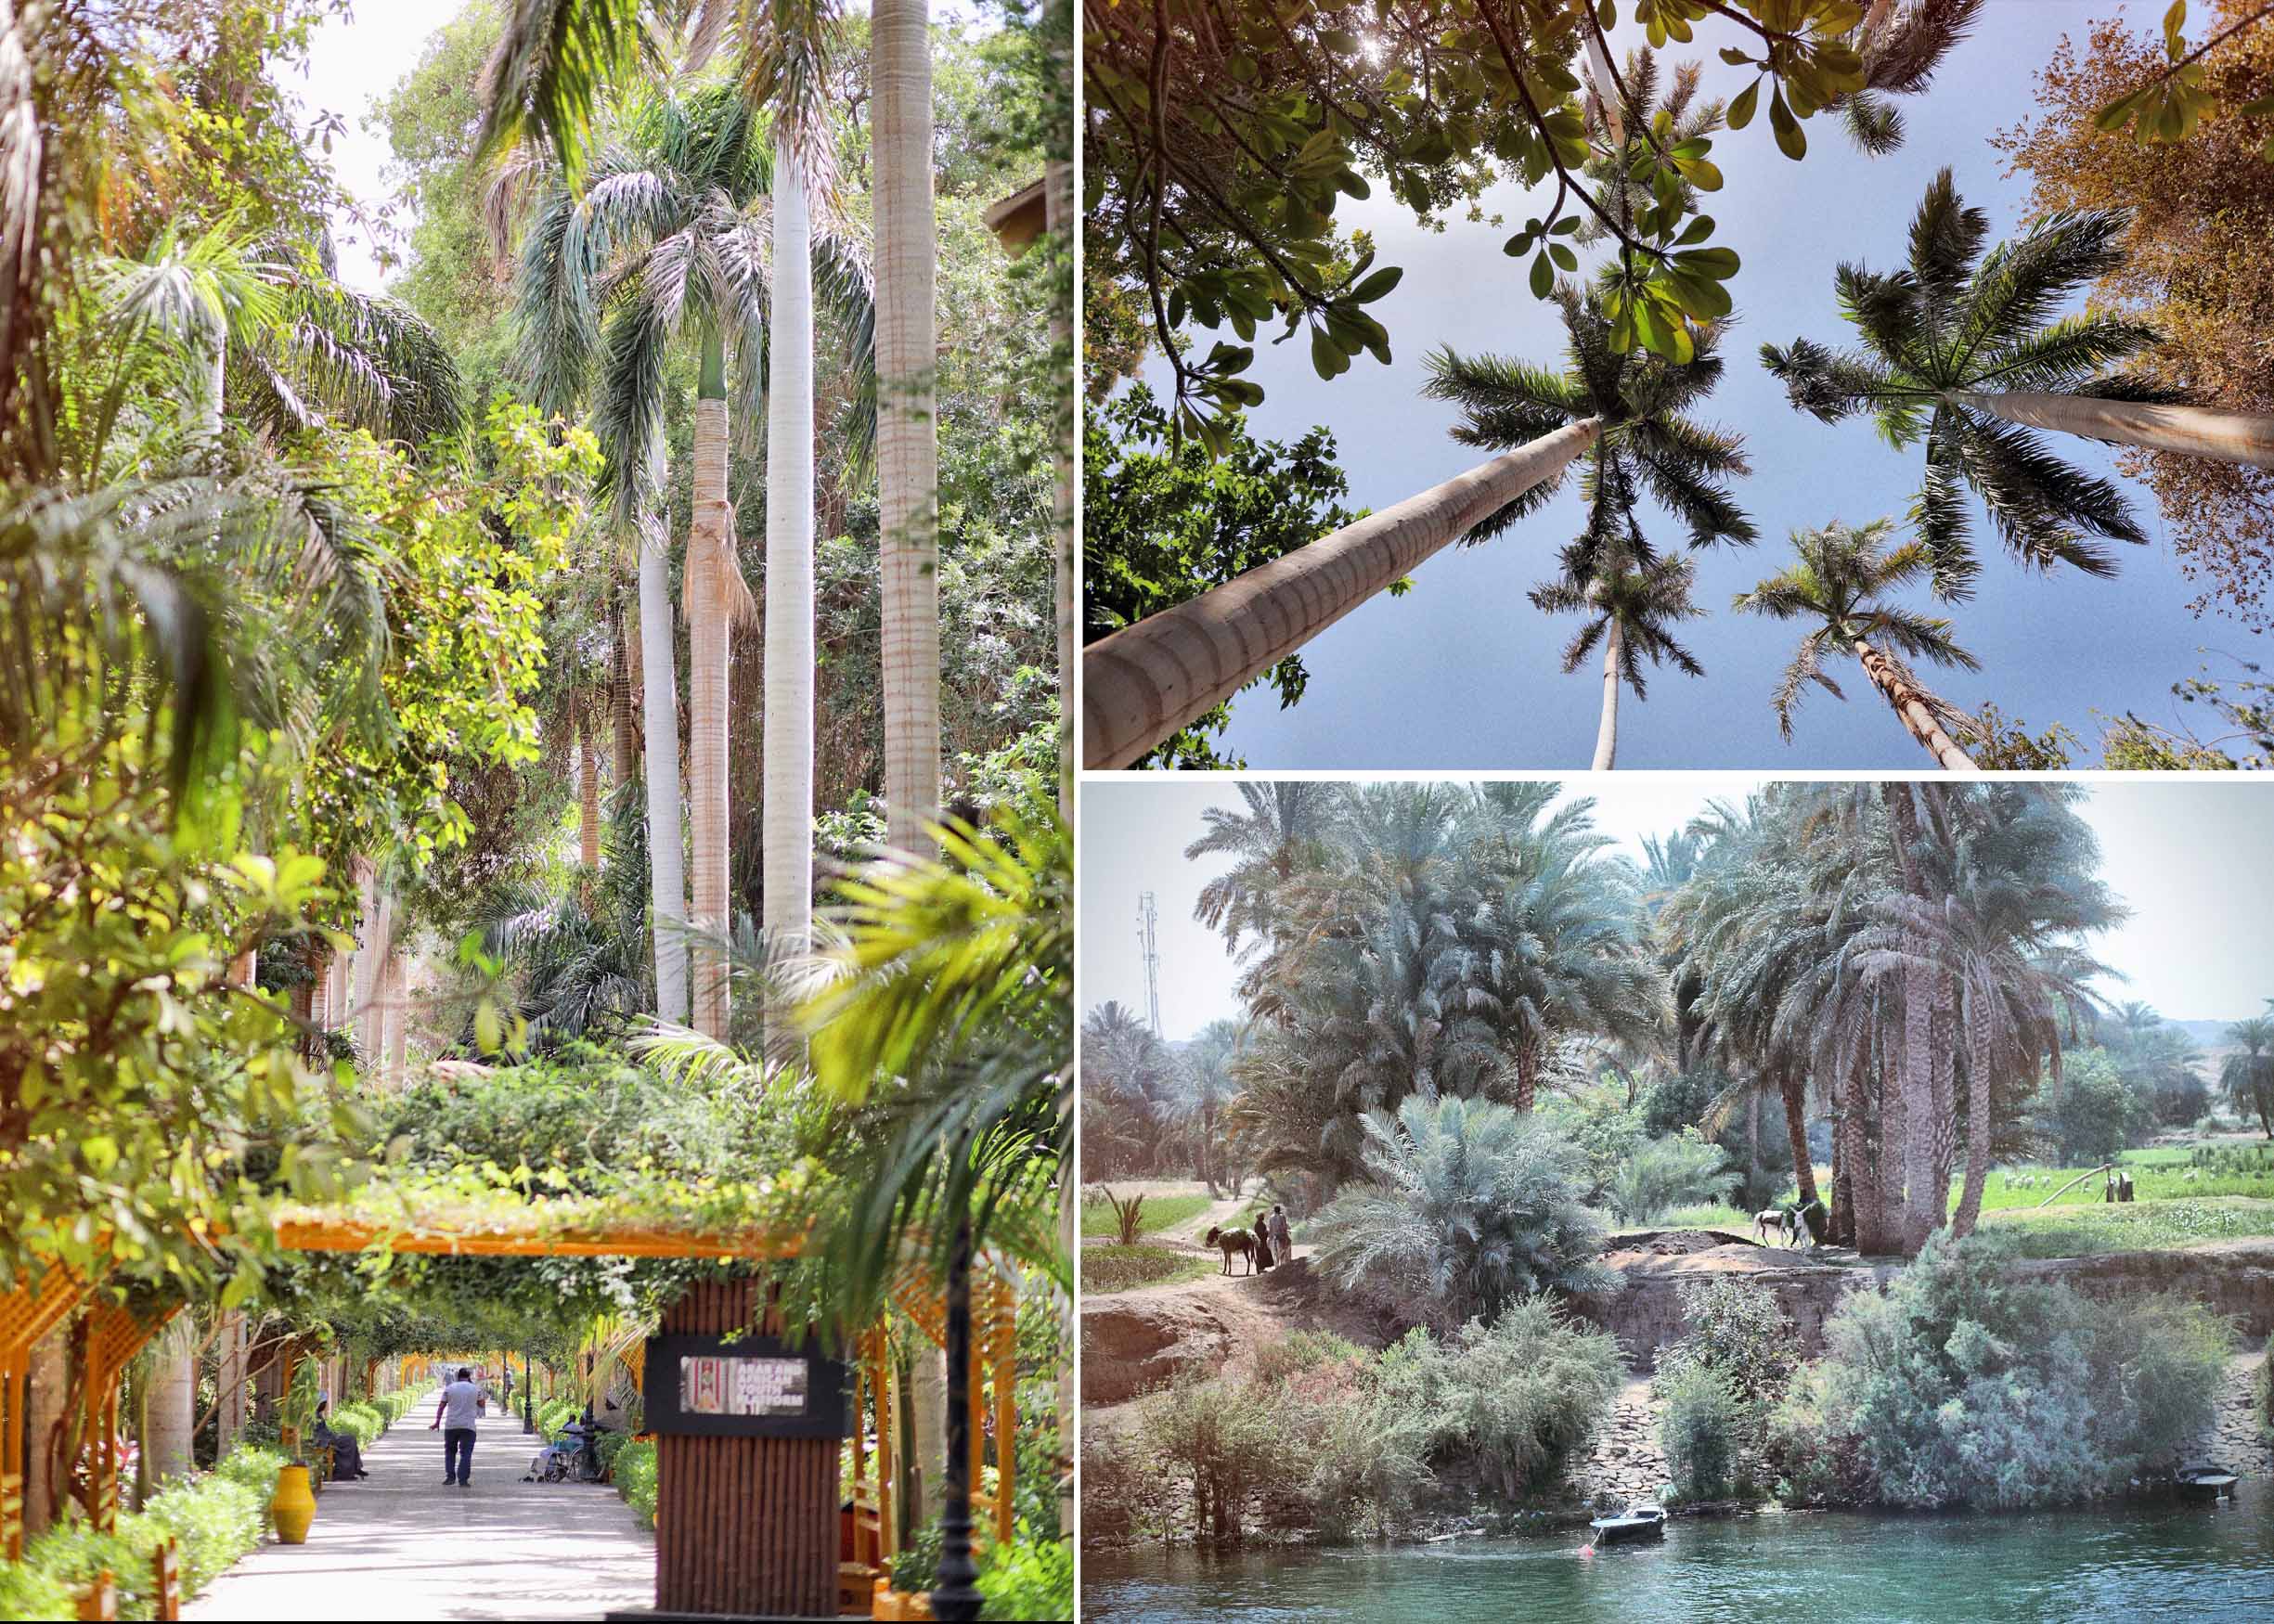 Inside the green zone is lush, abundant life fed by the waters of the Nile